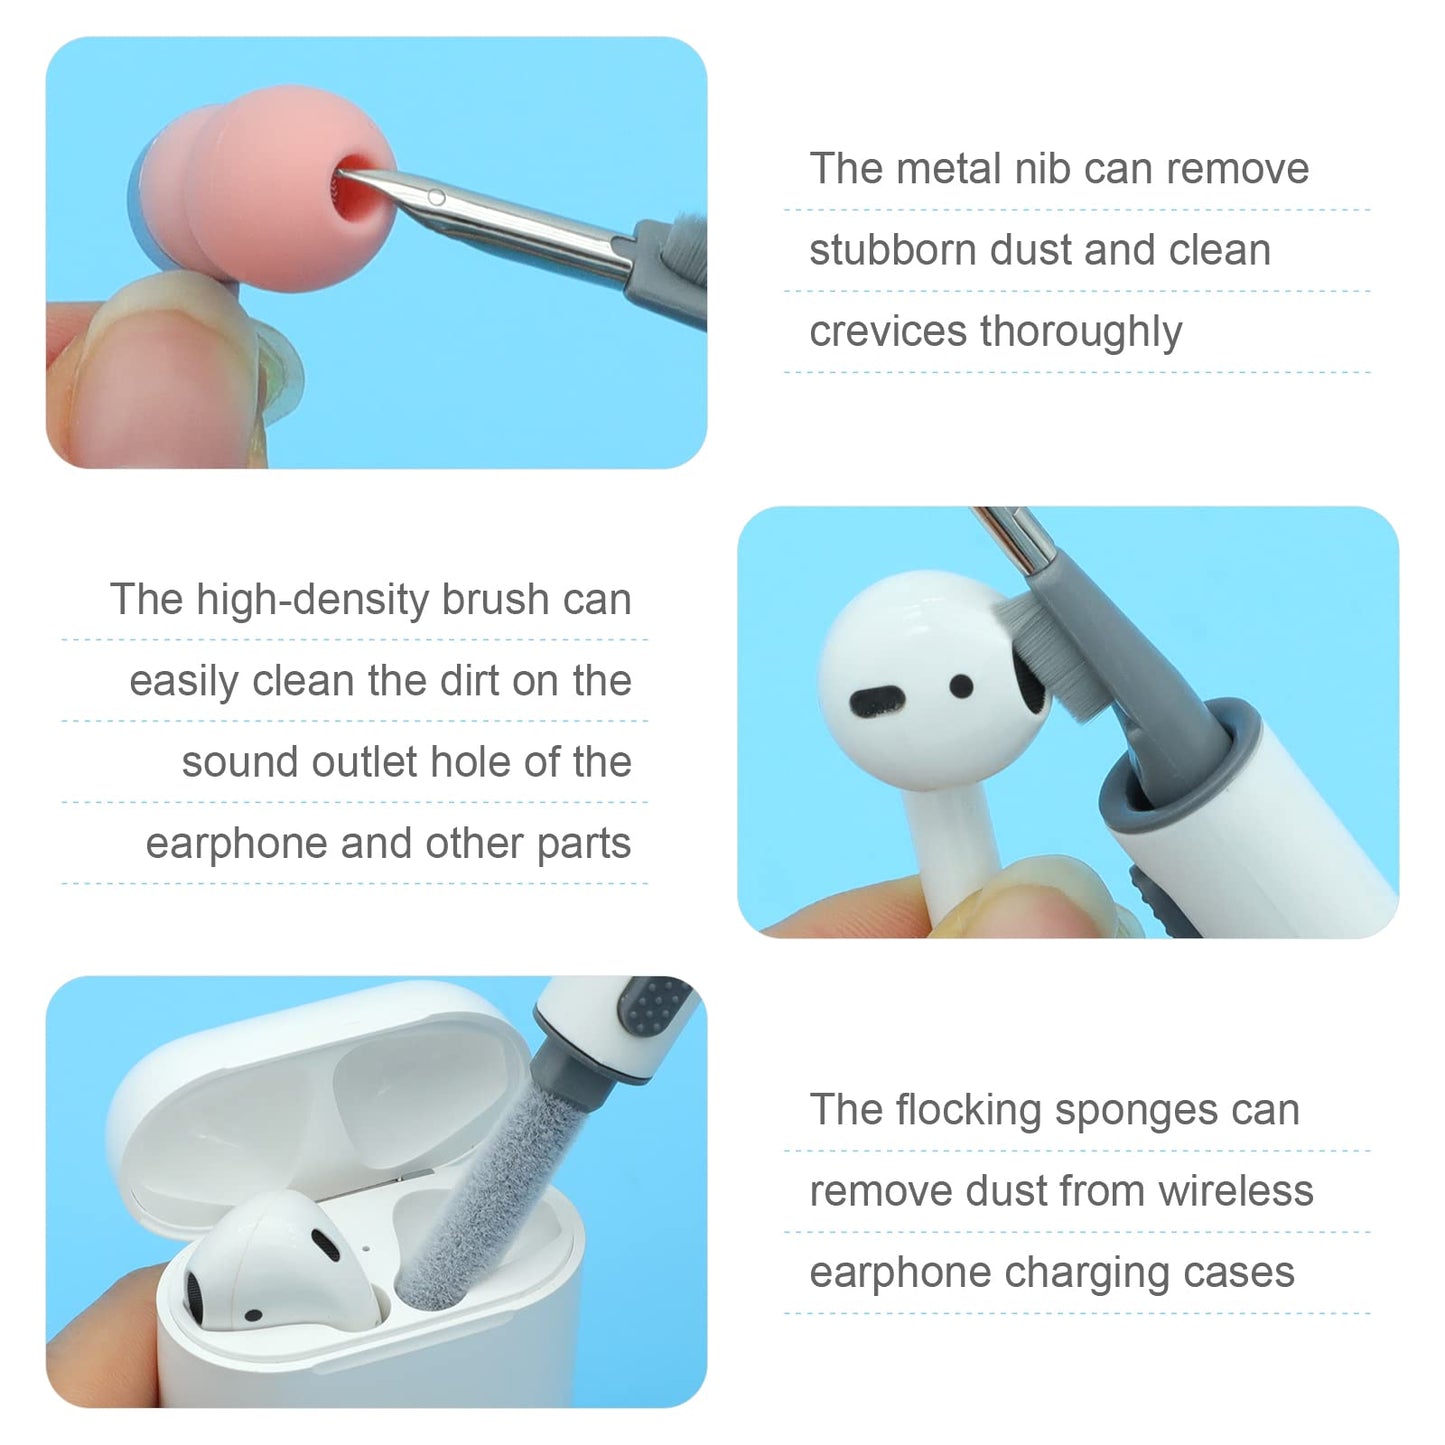 5 in 1 Keyboard Cleaning Brush Kit Keycap Puller Earbuds Cleaner for Airpods Pro 1 2 3 Bluetooth Earphones Case Cleaning Tools